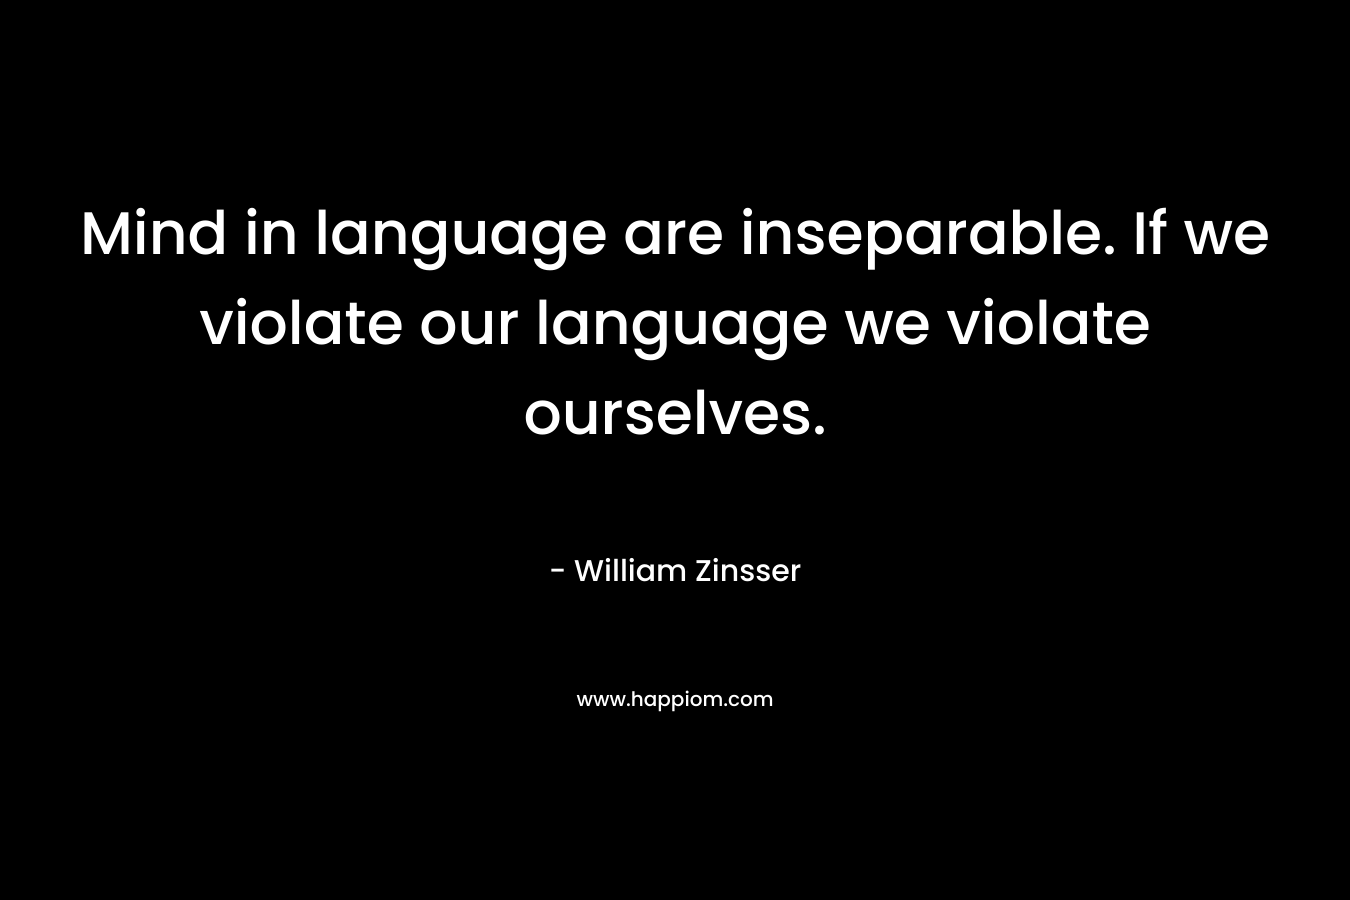 Mind in language are inseparable. If we violate our language we violate ourselves. – William Zinsser